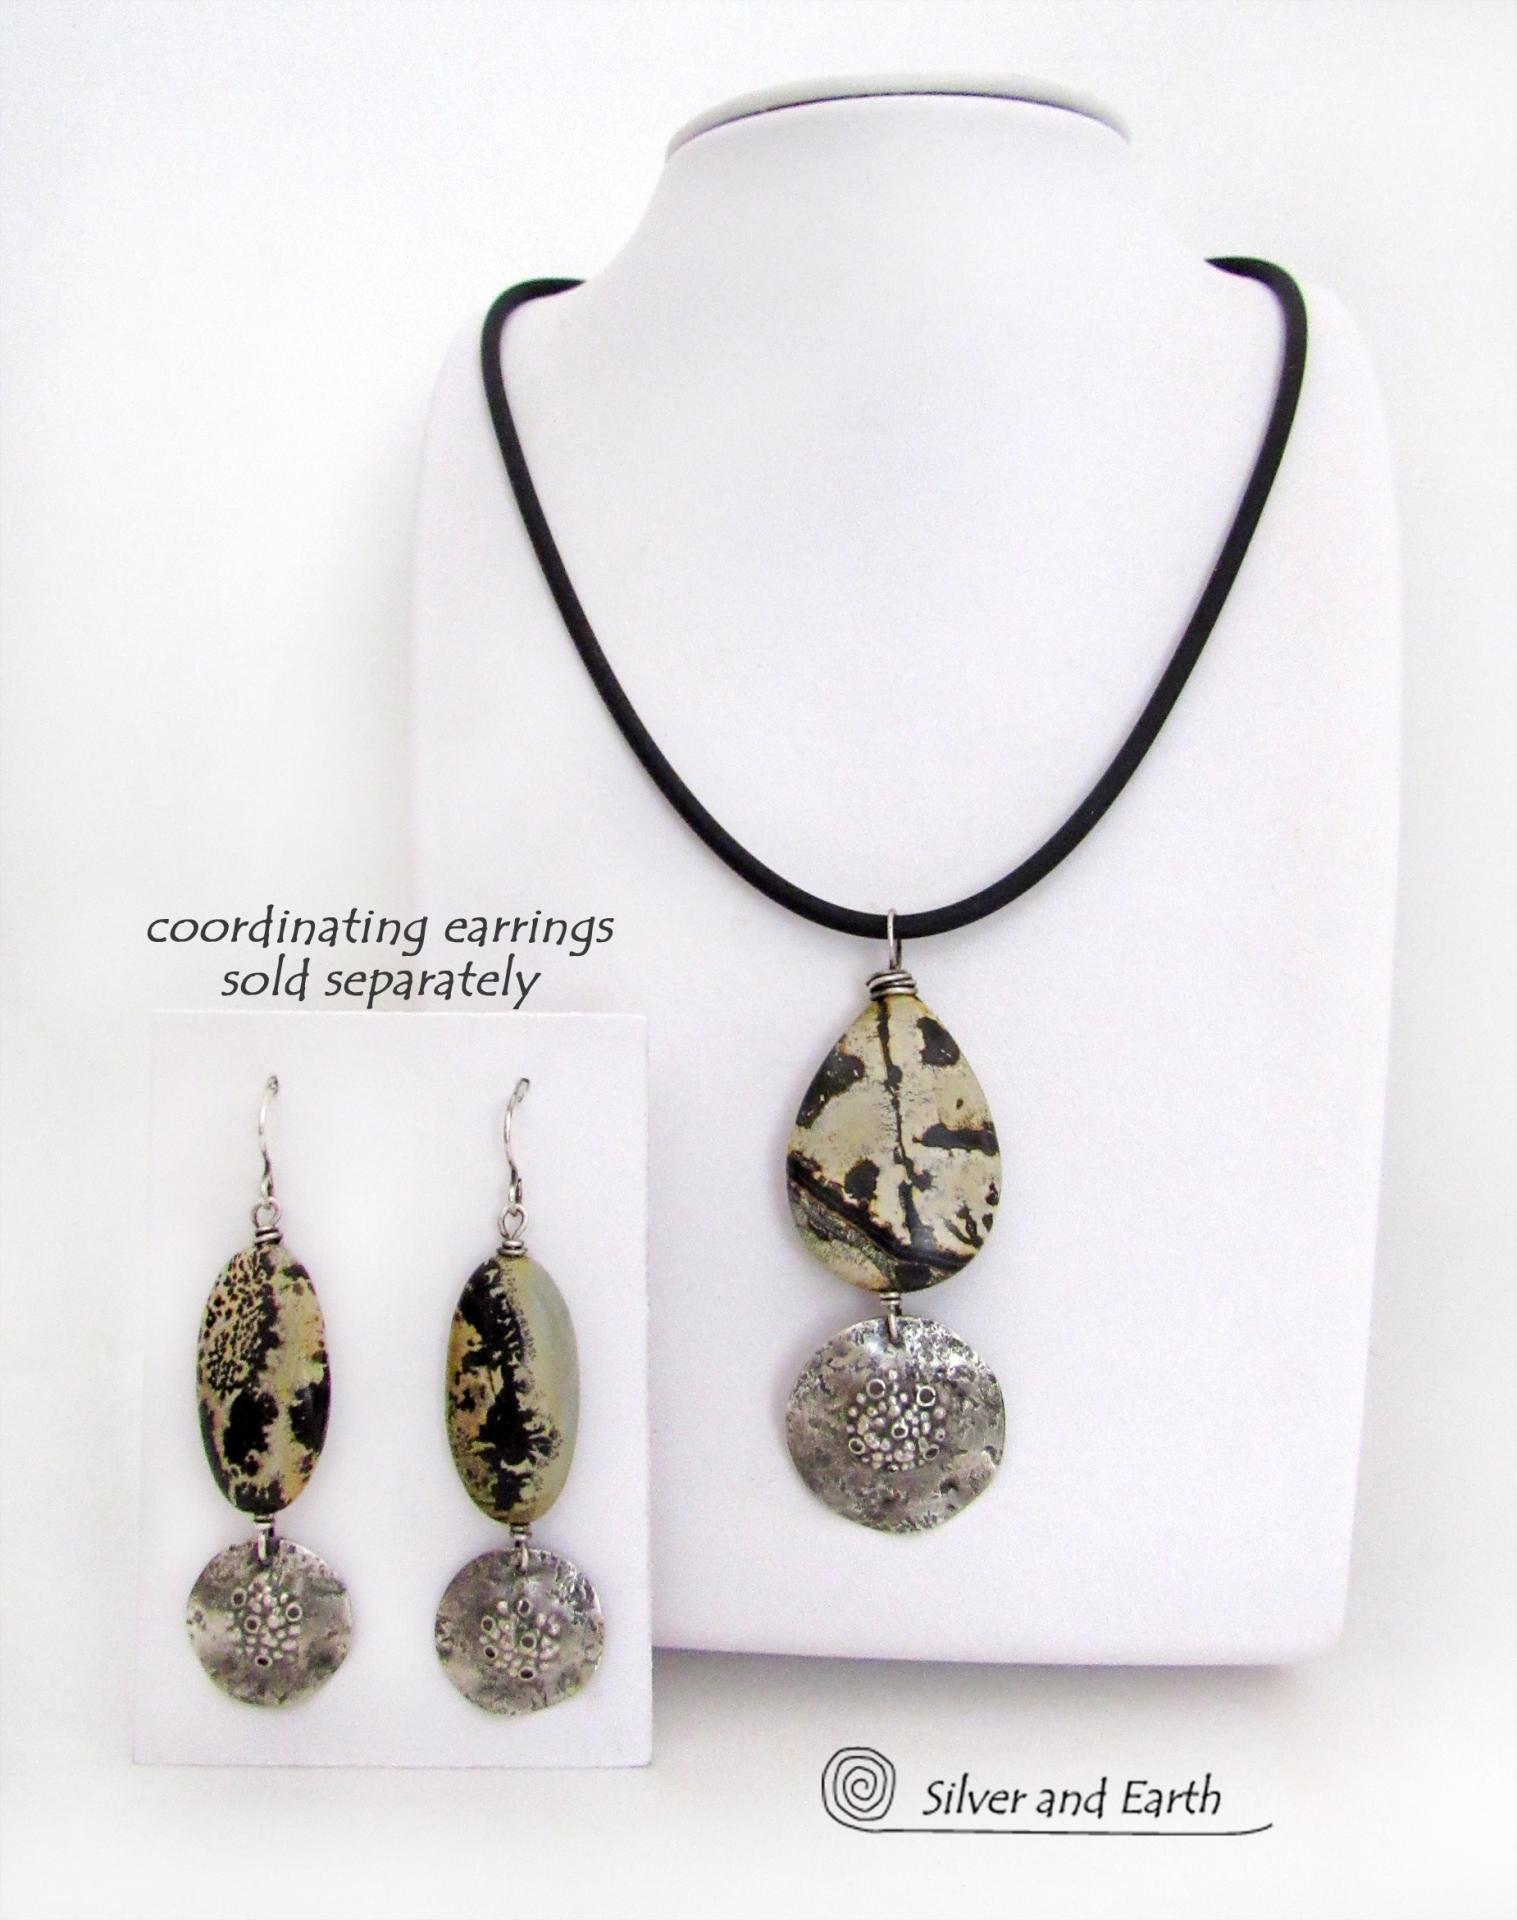 Paintbrush Jasper Stone Necklace with Rustic Hammered Sterling Silver Dangle - One of Kind Natural Stone Jewelry